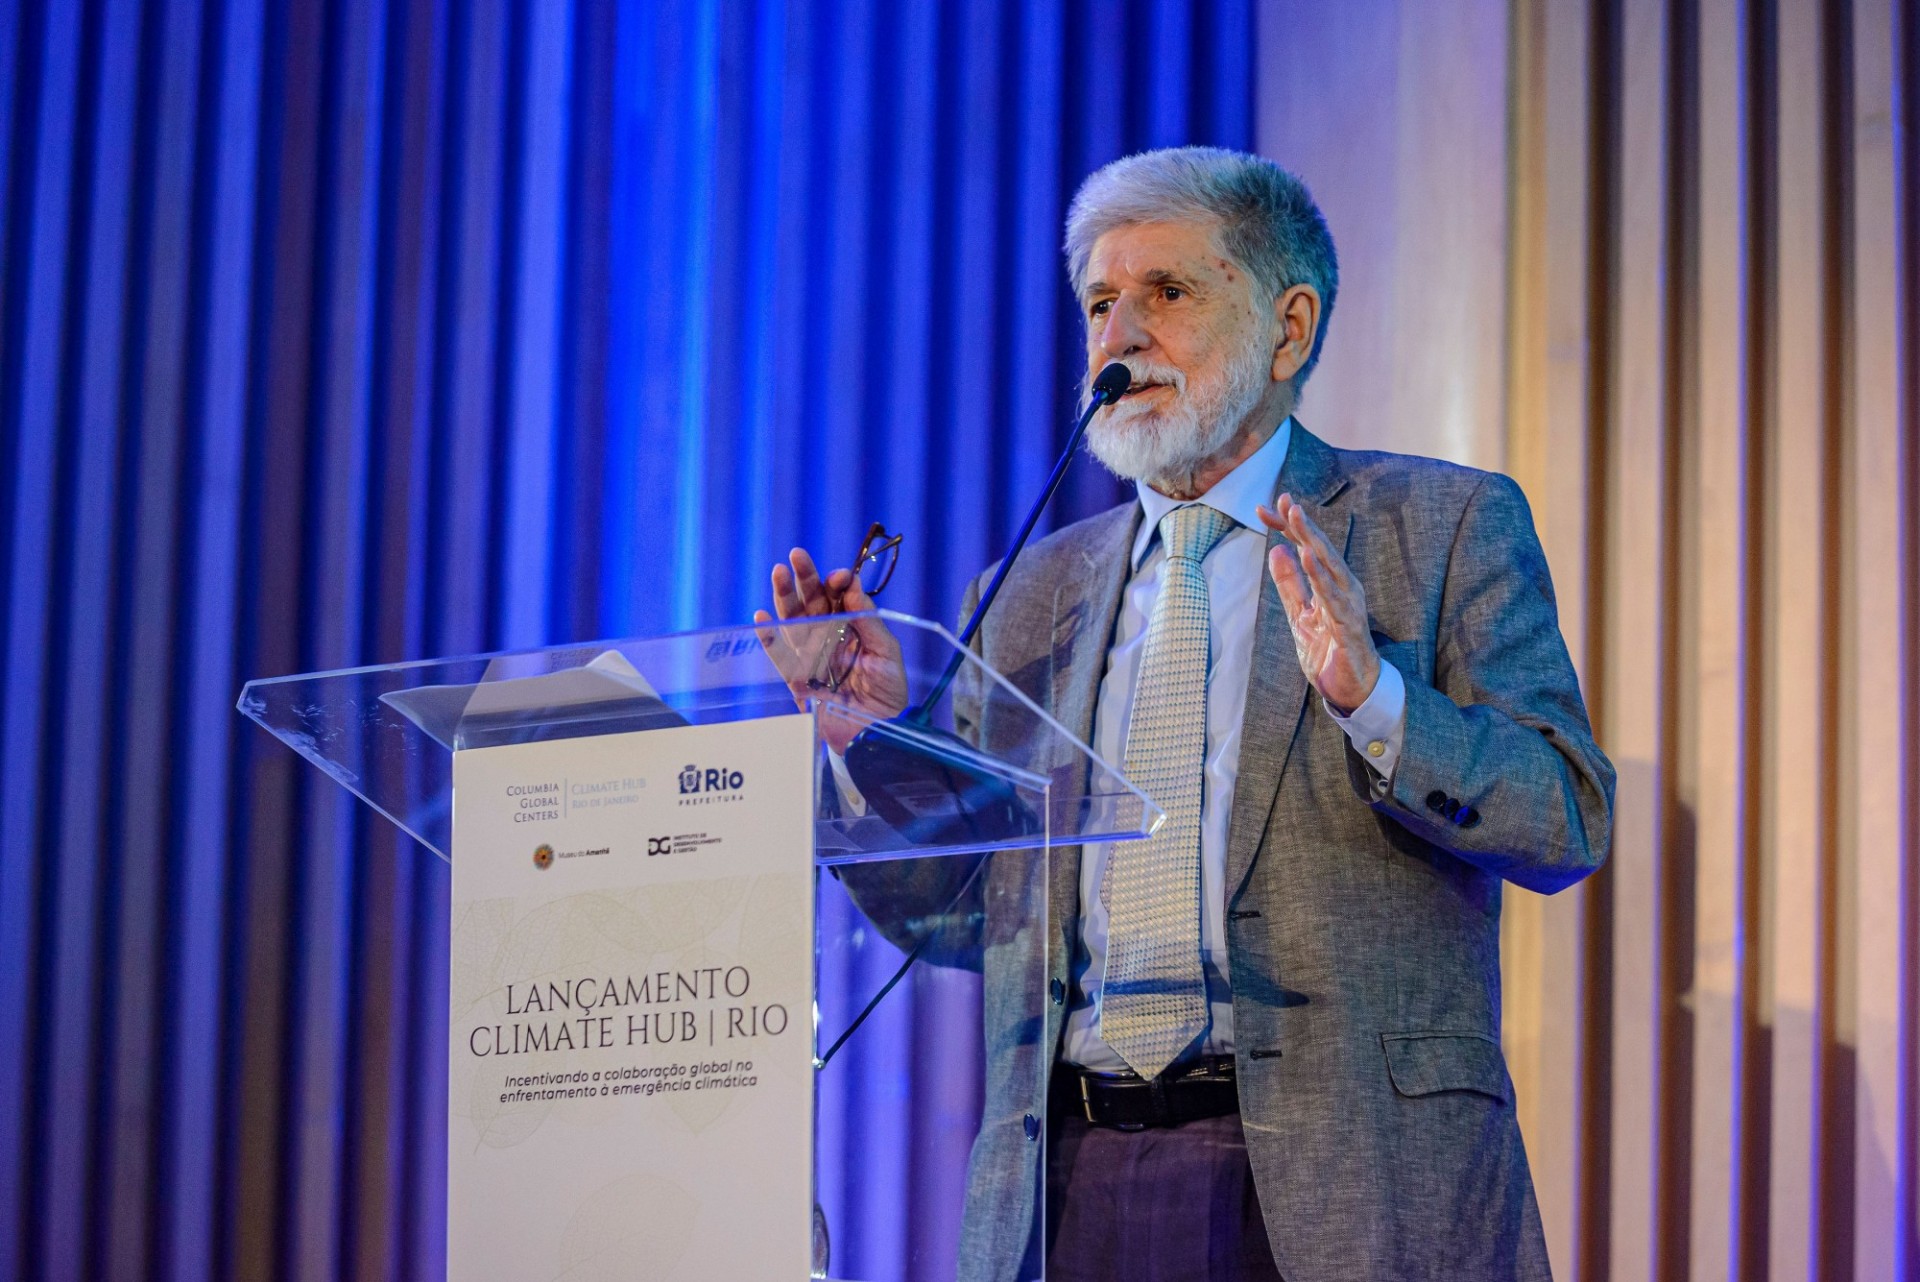 Celso Amorim, special advisor to the Presidency of the Republic and former Minister of Foreign Affairs, during the launch event of Climate Hub | Rio. Photo: Fabio Cordeiro